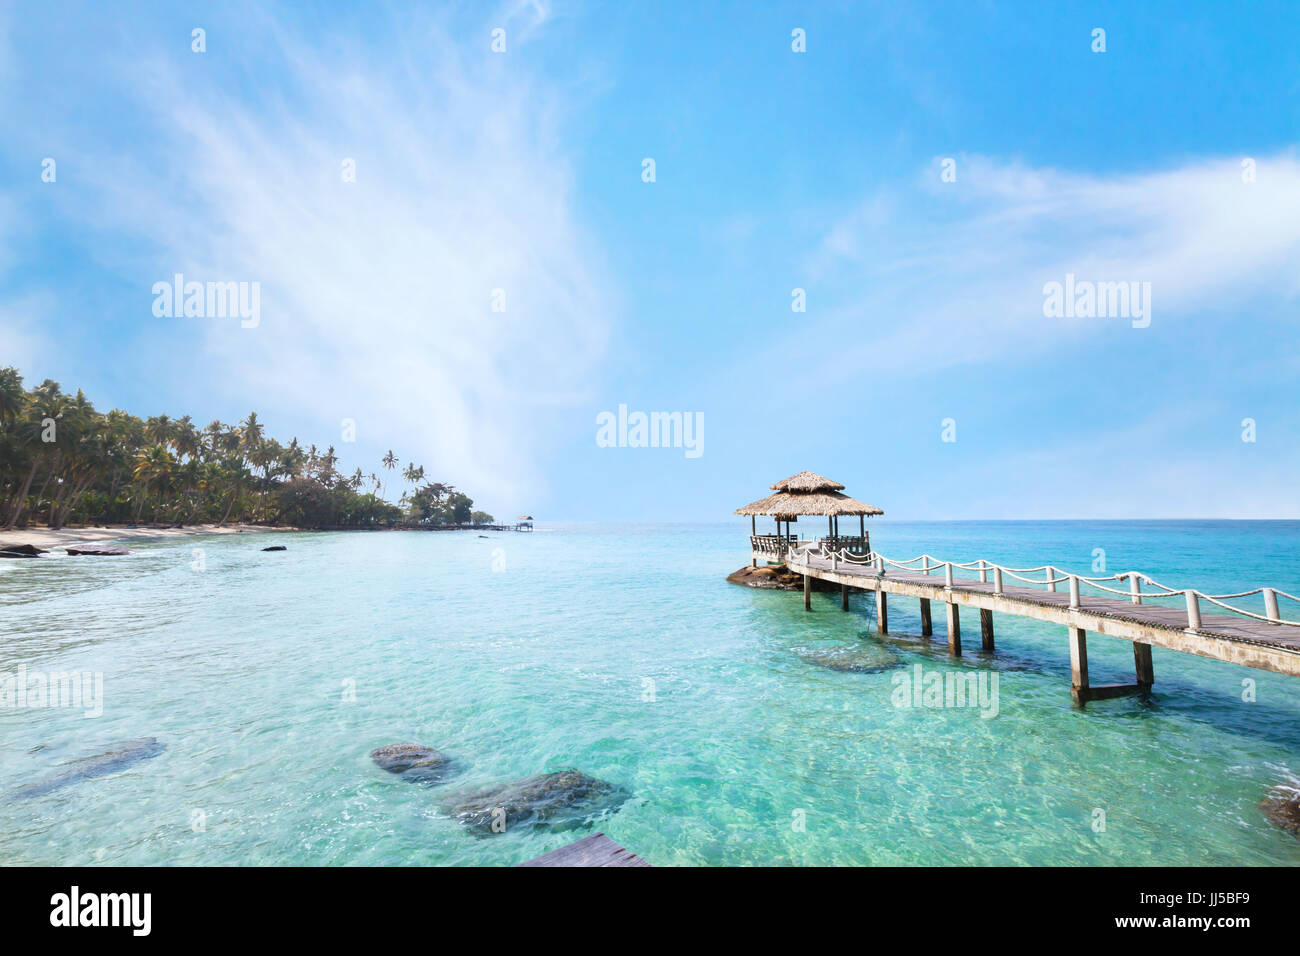 beautiful tropical paradise beach landscape, island with pier in turquoise water Stock Photo